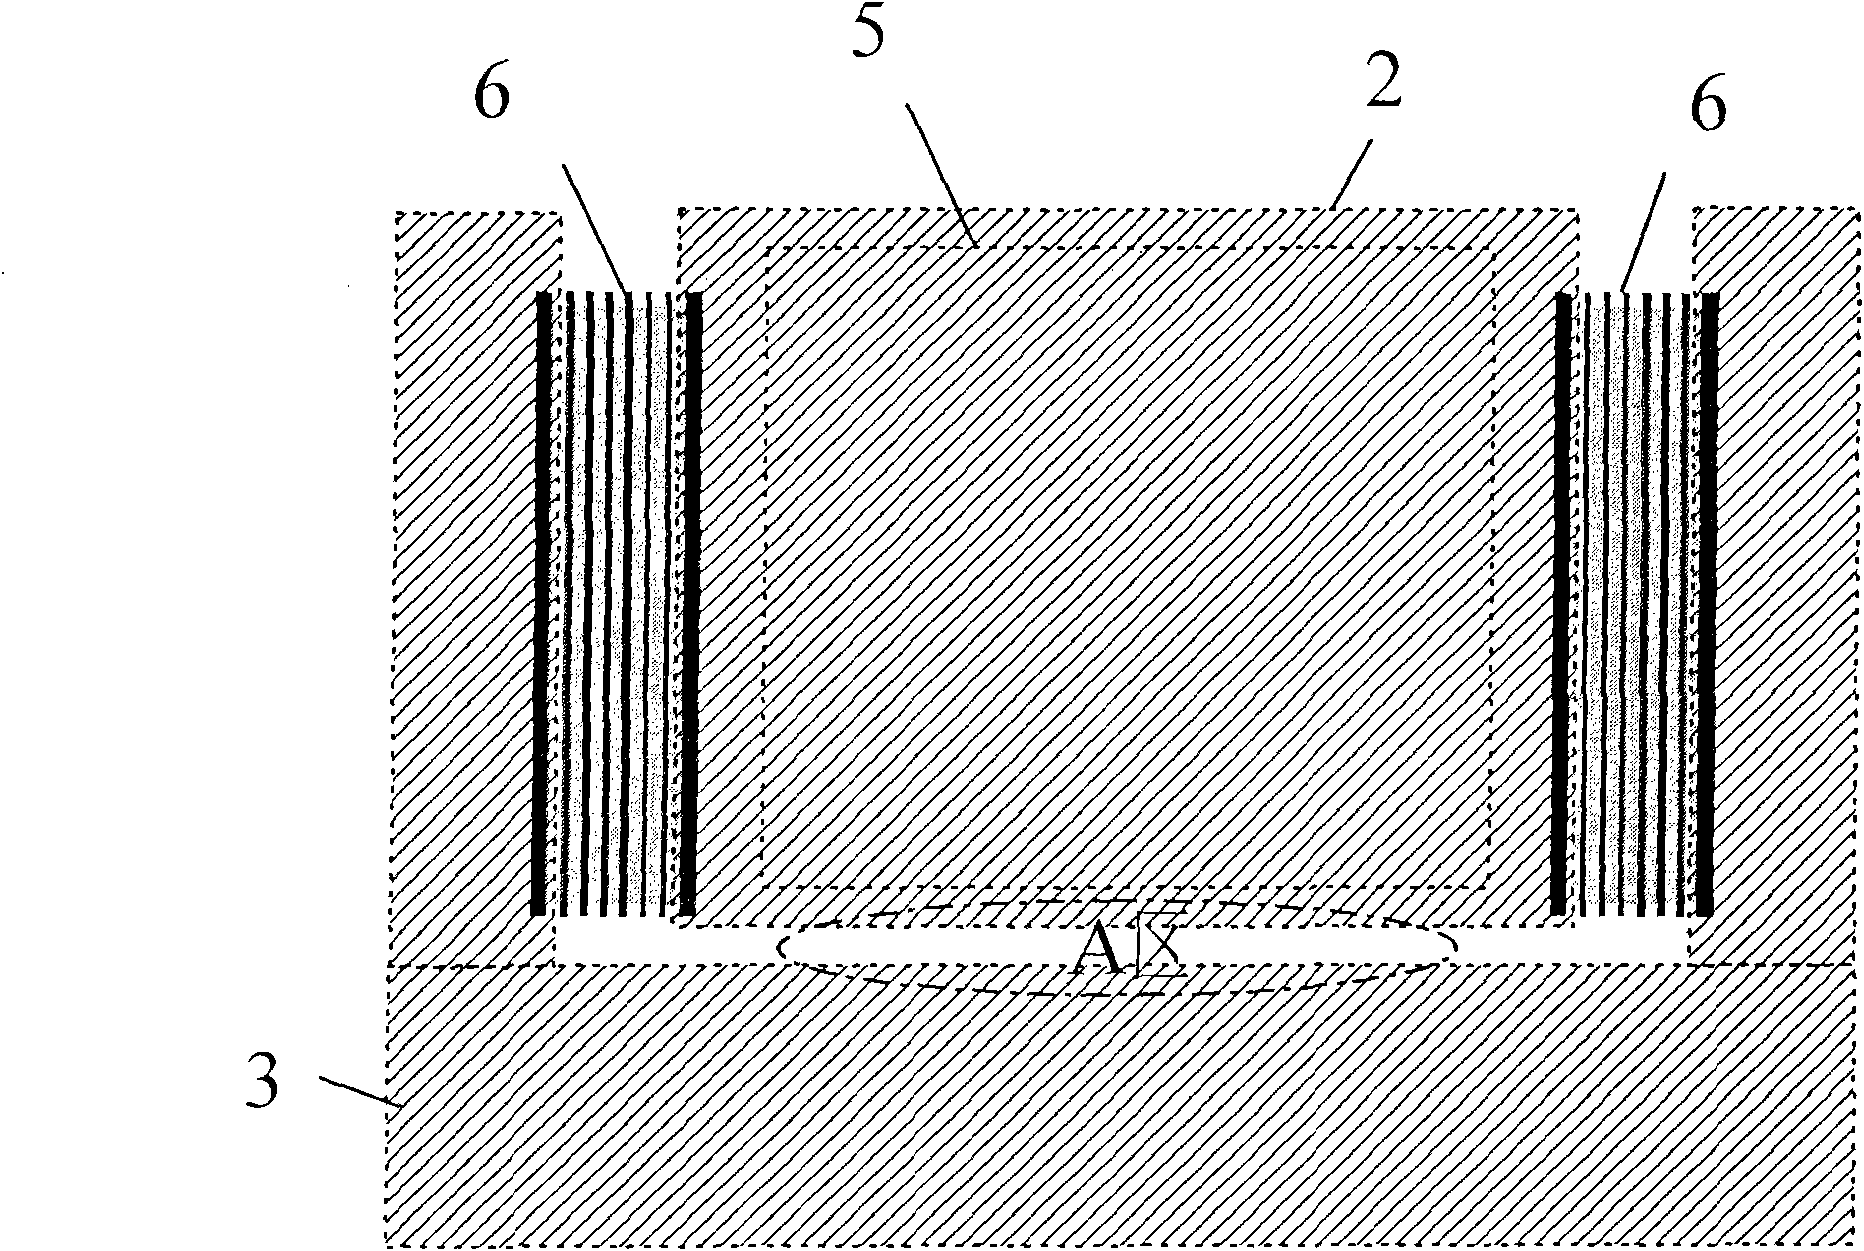 ESD protection integrated power MOSFET or IGBT and preparation method thereof